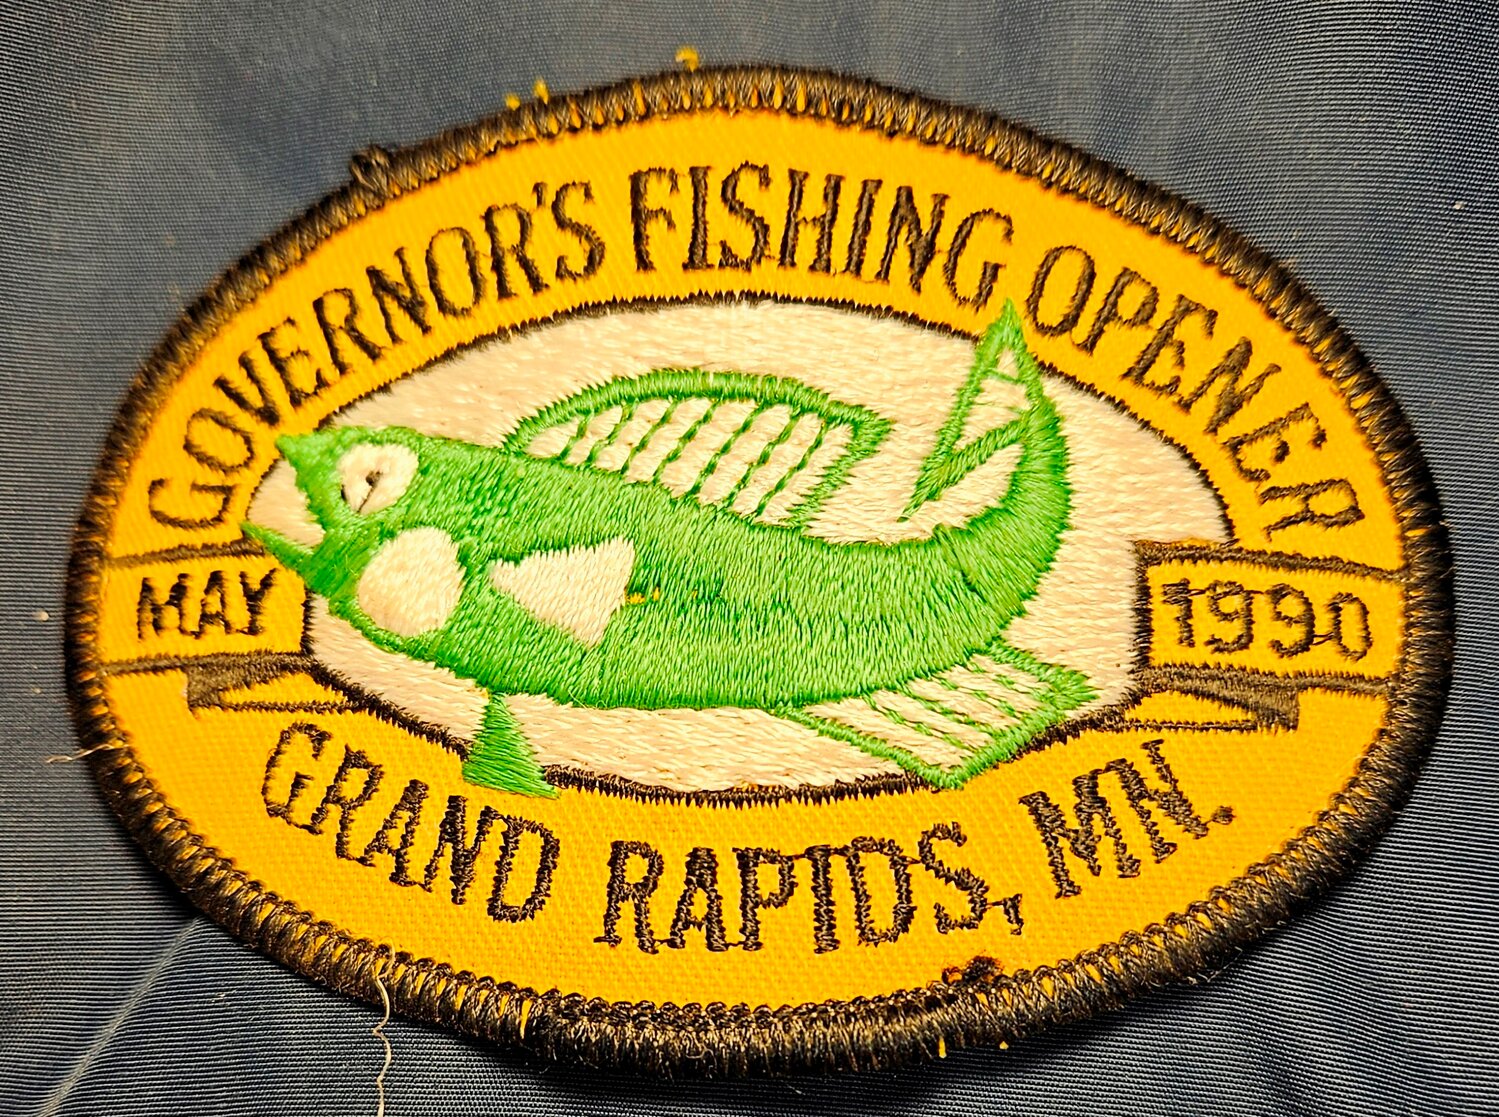 Jacket patch given to media covering the 1990 Governor's Fishing Opener